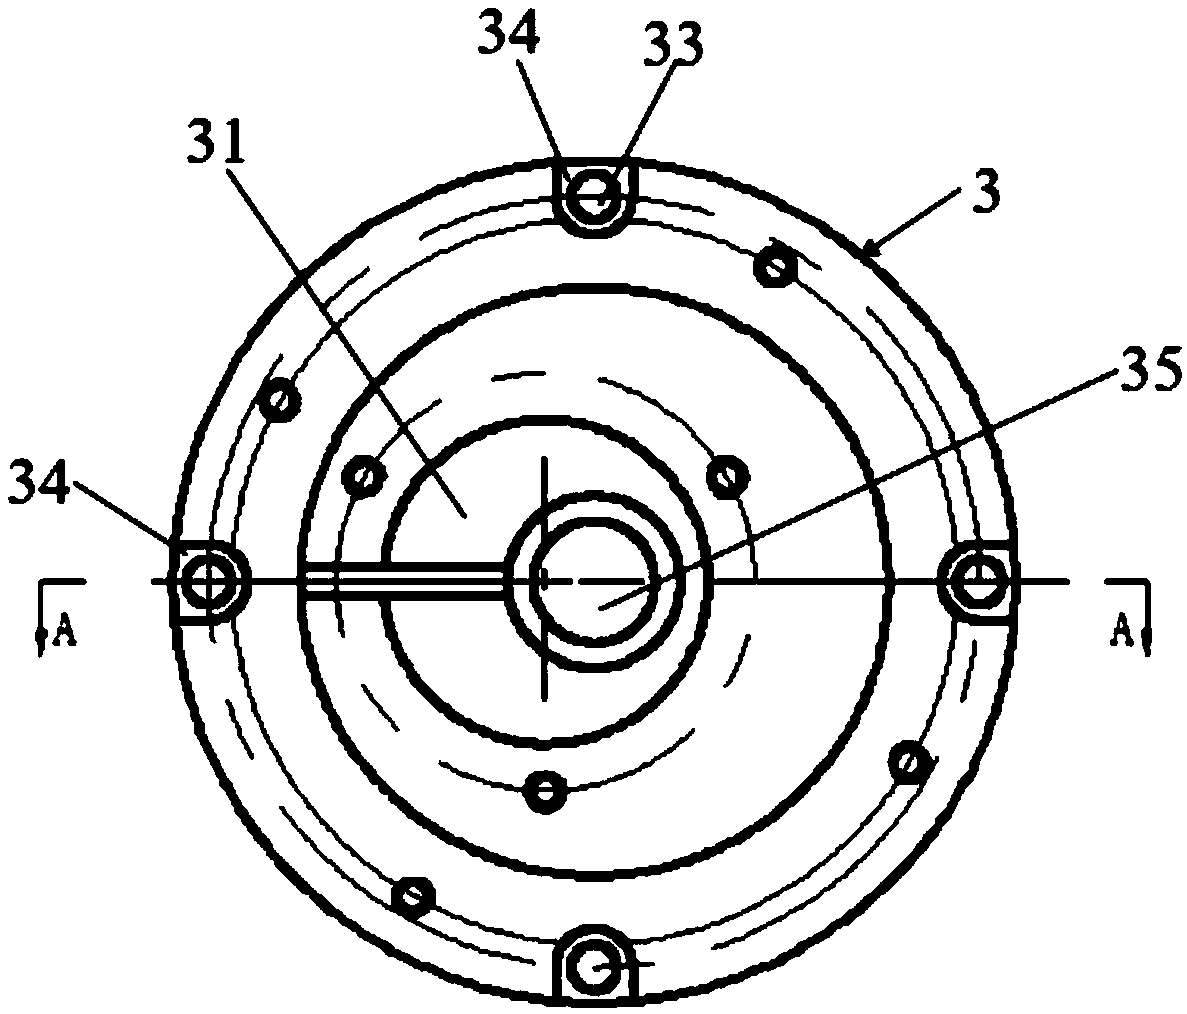 Positioning tool for machining eccentric flange covers and application method thereof